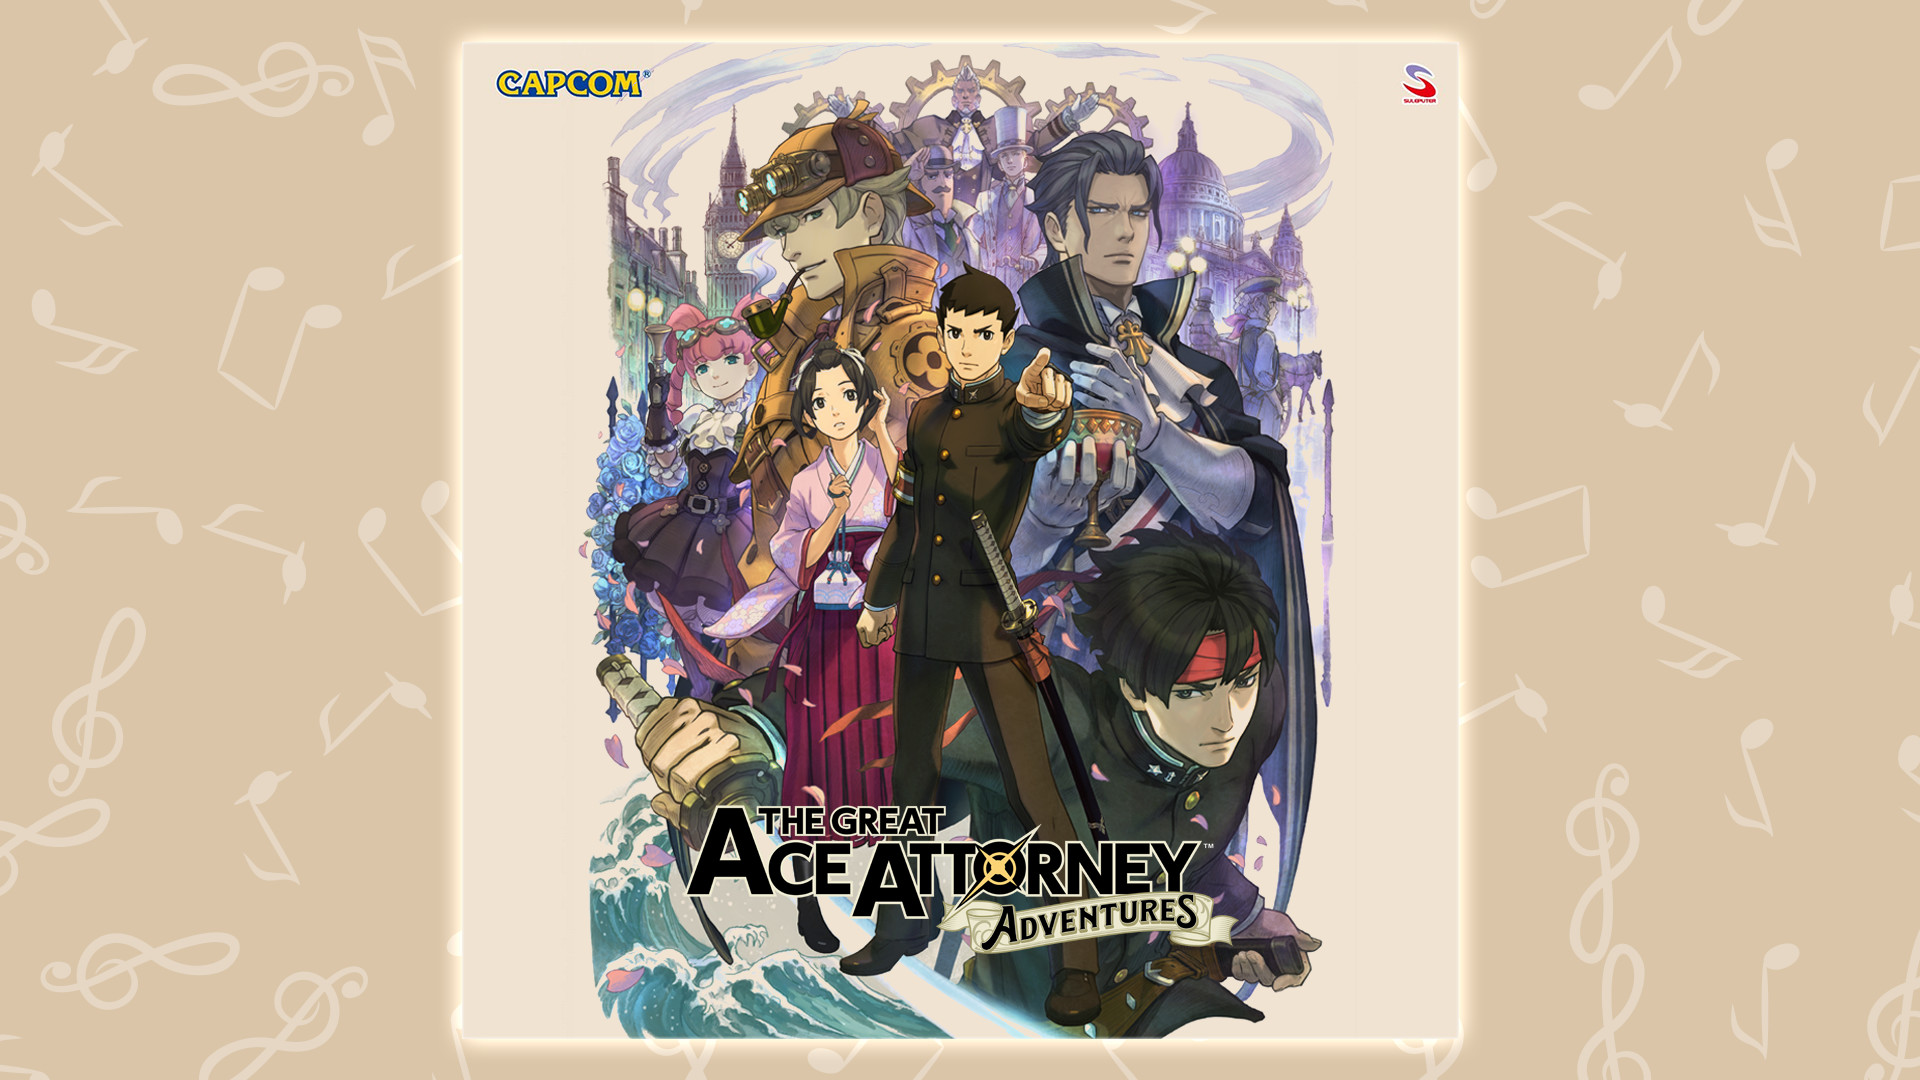 The Great Ace Attorney: Adventures Grand Performance Recording Featured Screenshot #1